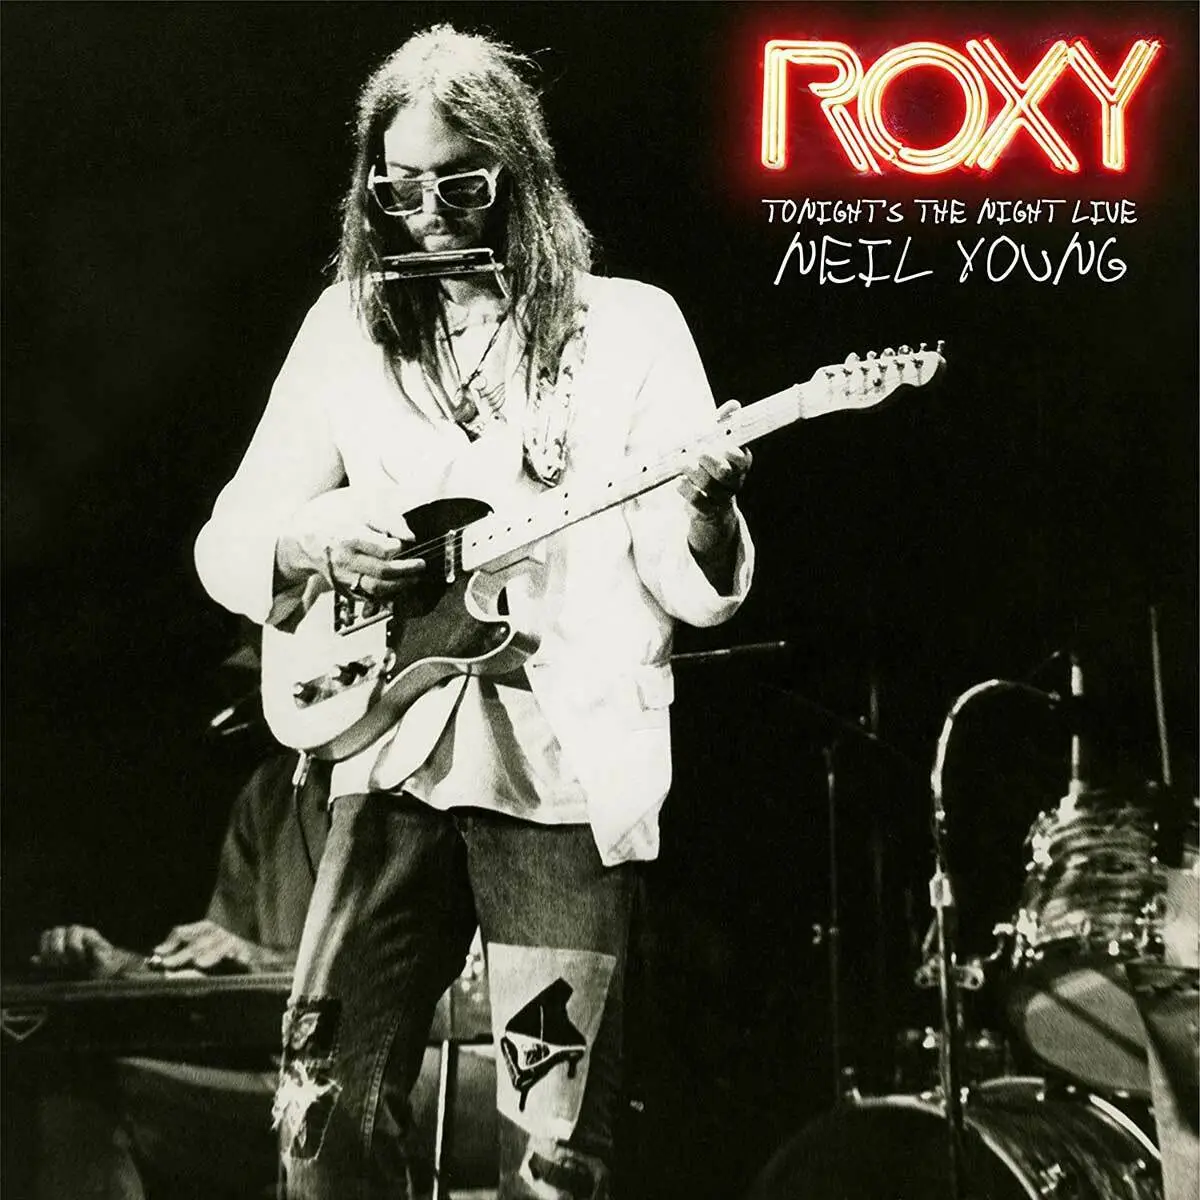 Neil Young - Roxy: Tonight’s The Night Live (2018)